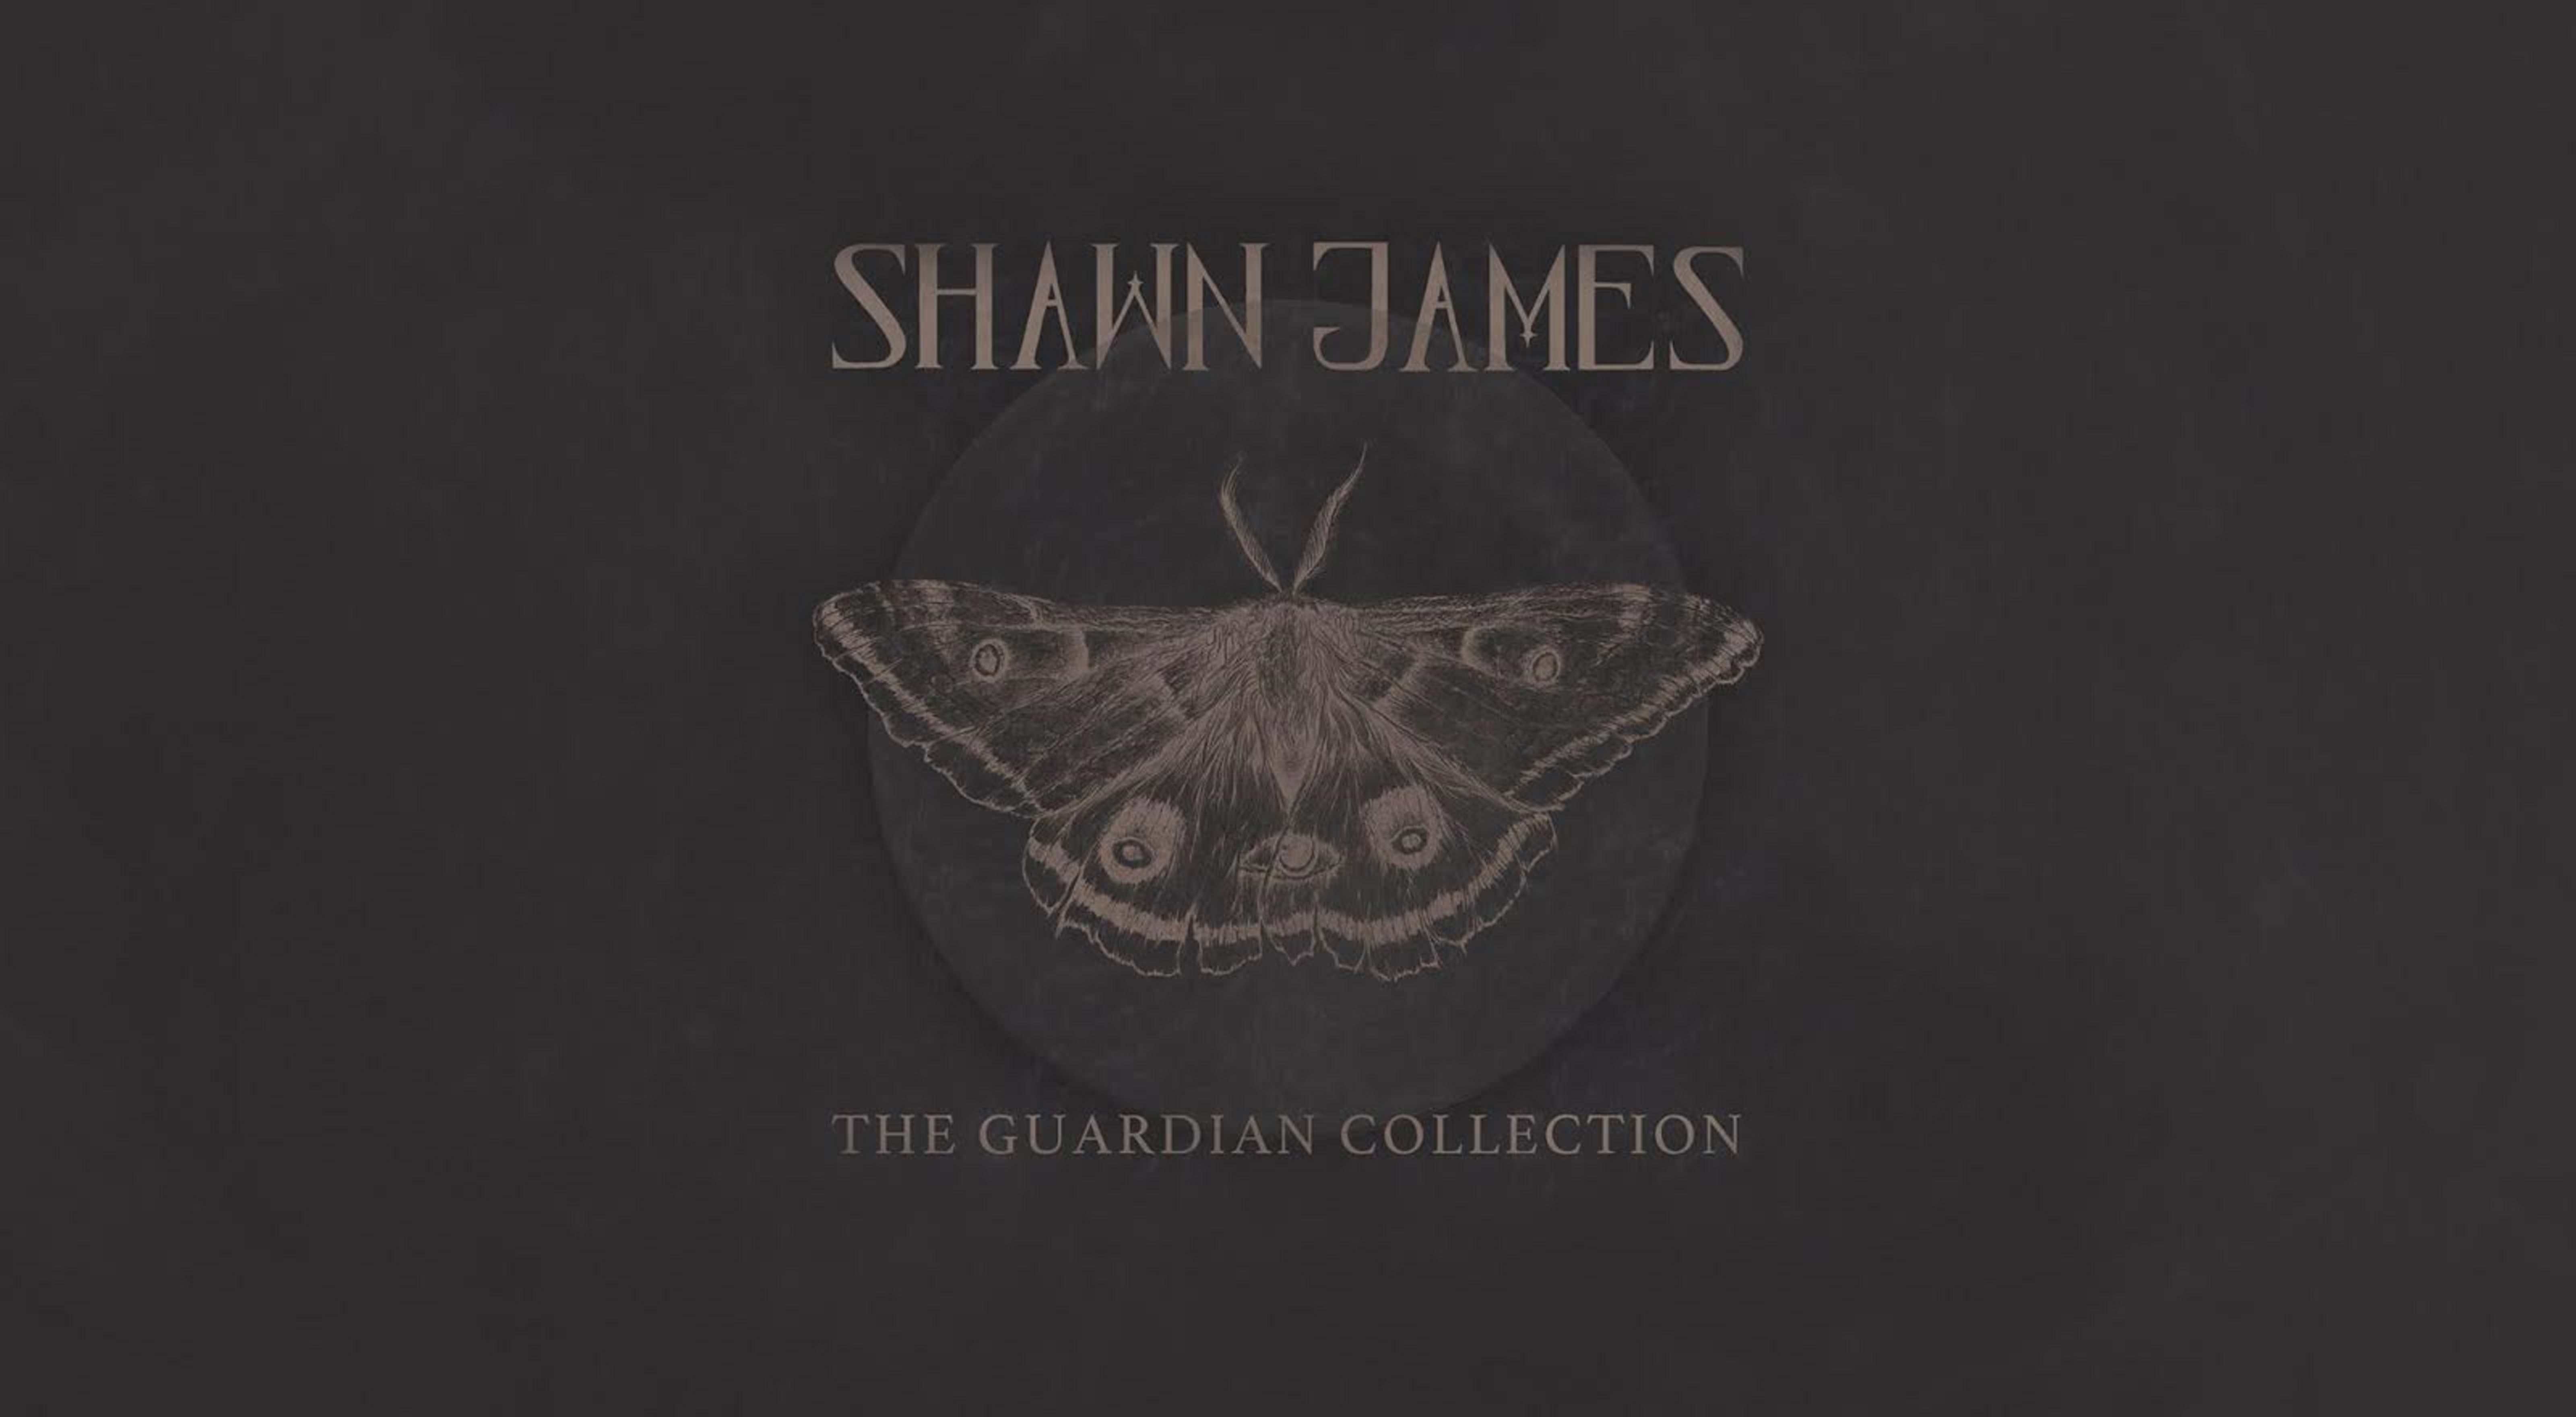 Shawn James releases new album, The Guardian Collection